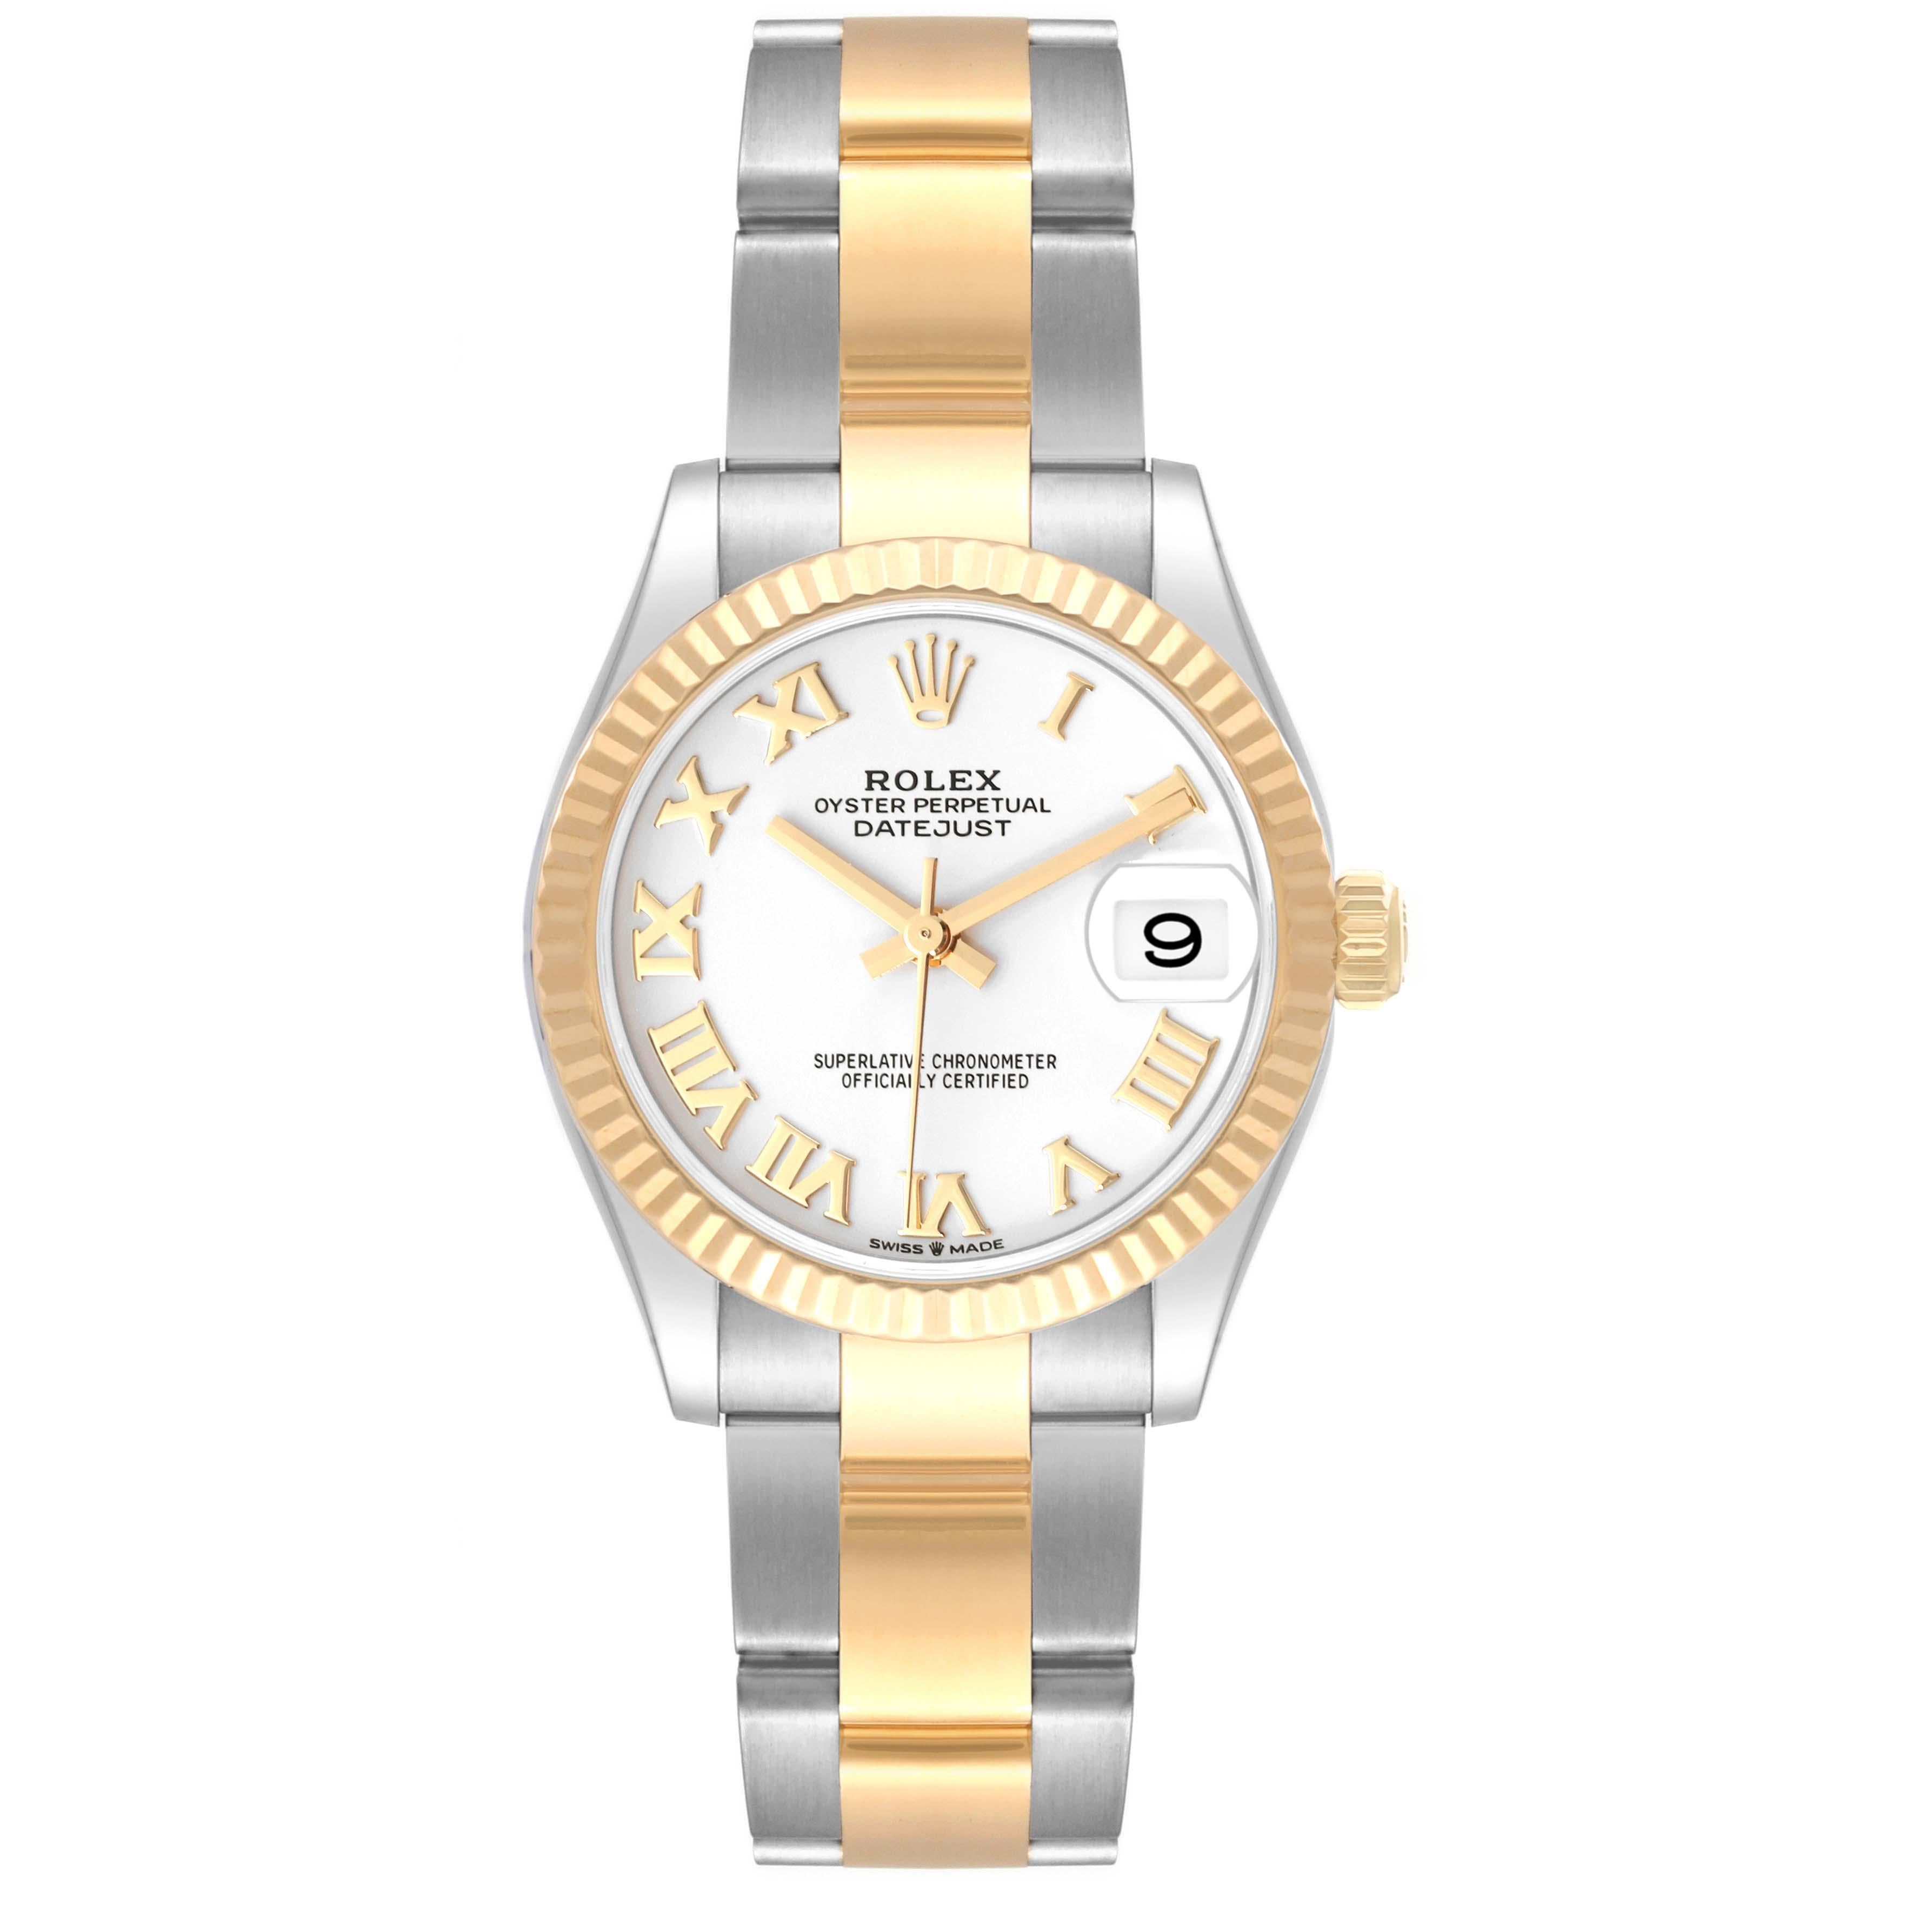 Rolex Datejust Midsize Steel Yellow Gold Ladies Watch 278273 Box Card. Officially certified chronometer automatic self-winding movement. Stainless steel oyster case 31.0 mm in diameter. Rolex logo on 18K yellow gold crown. 18k yellow gold fluted